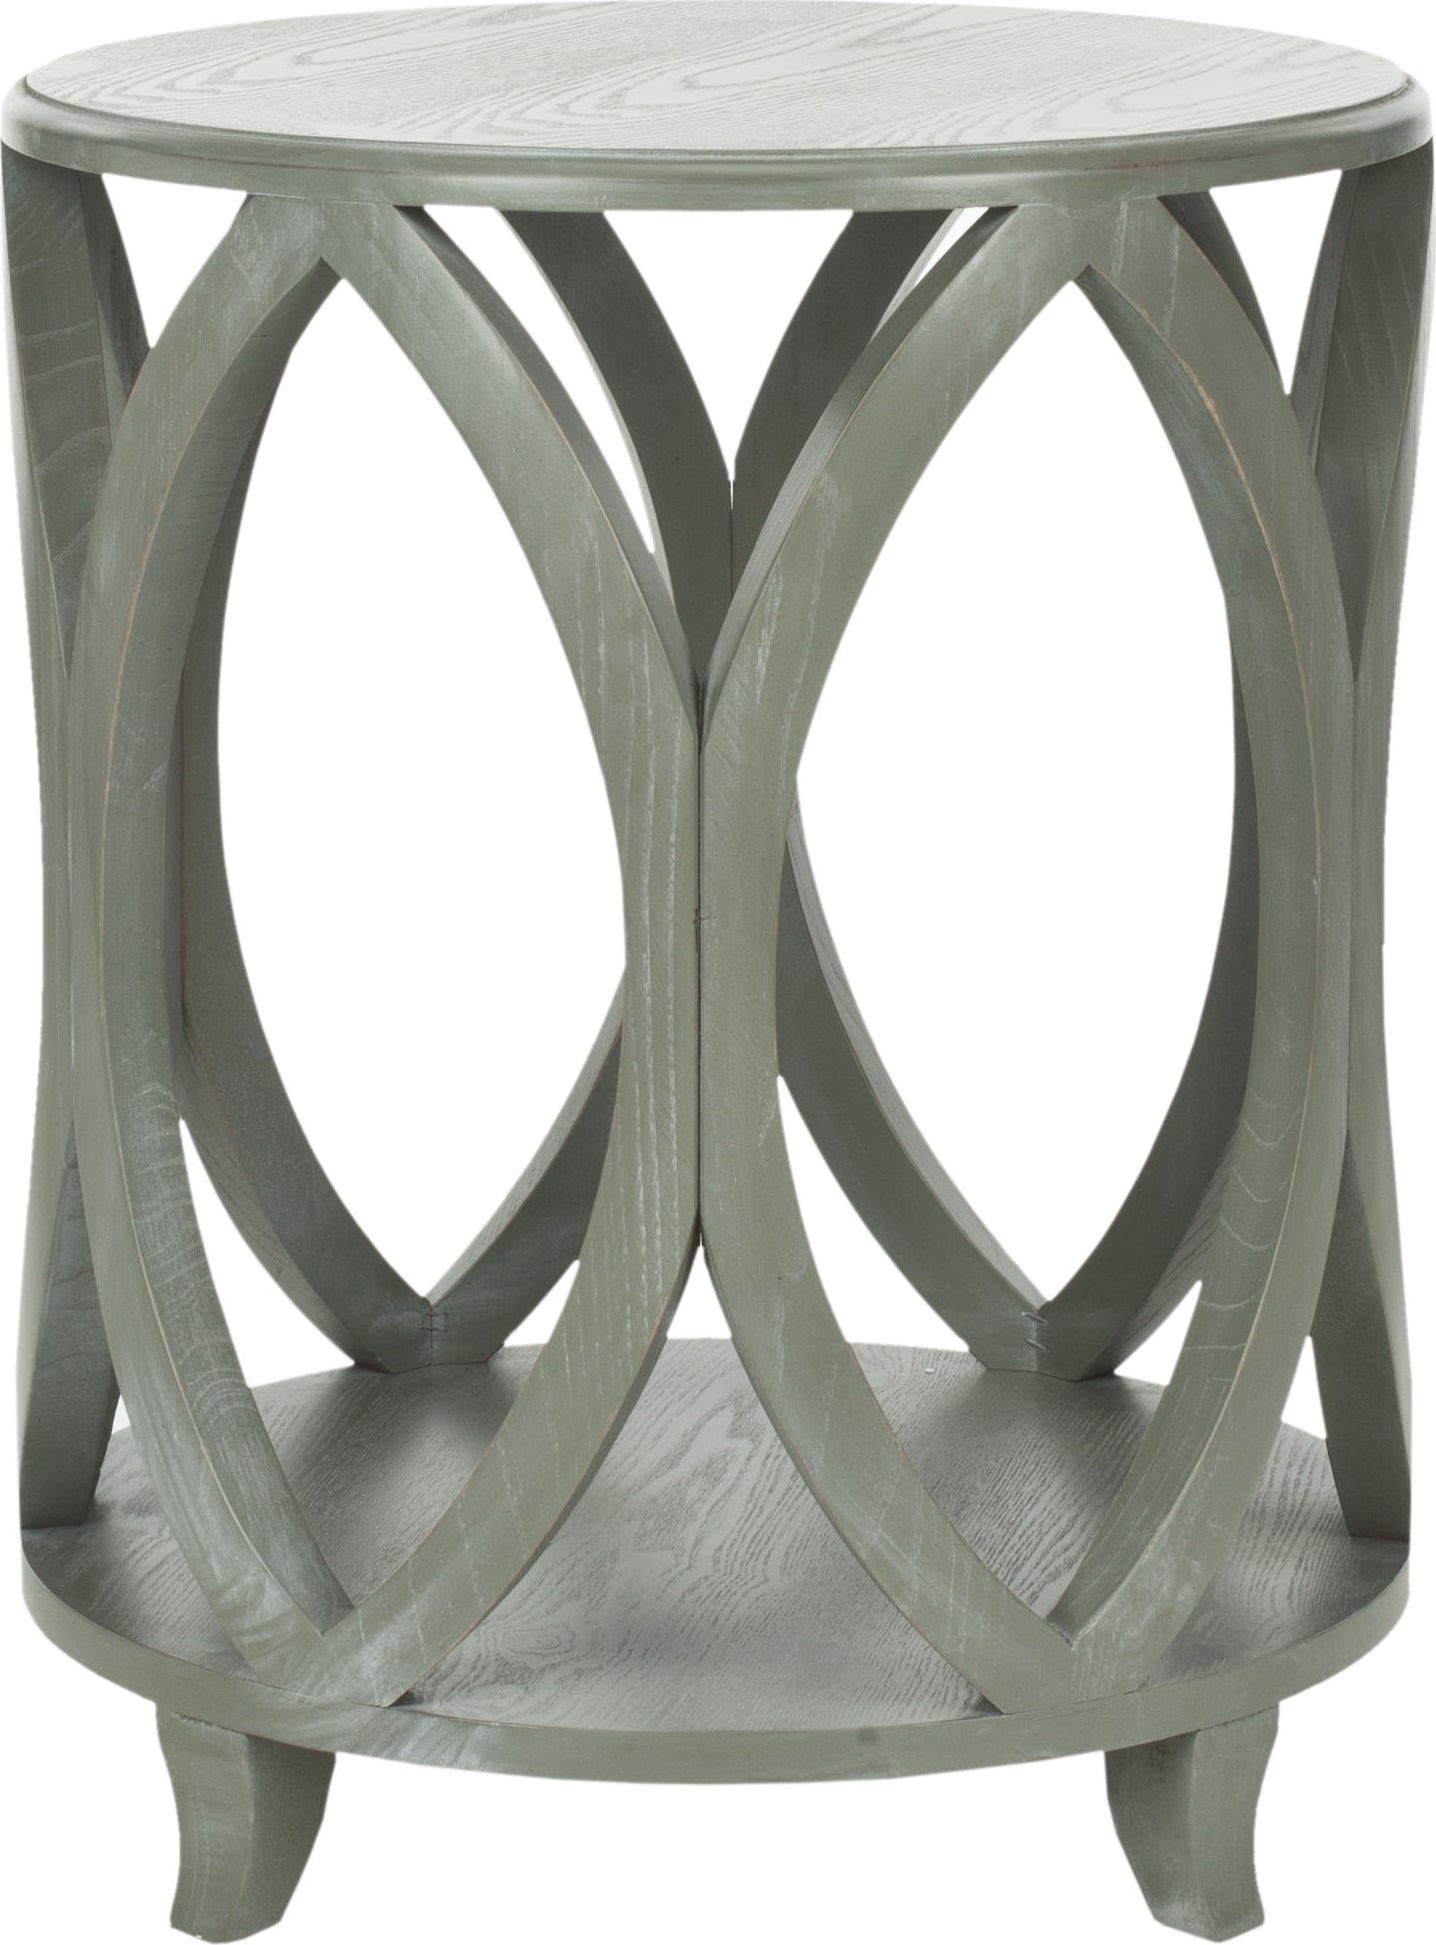 Safavieh Janika Round Accent Table French Grey Furniture main image